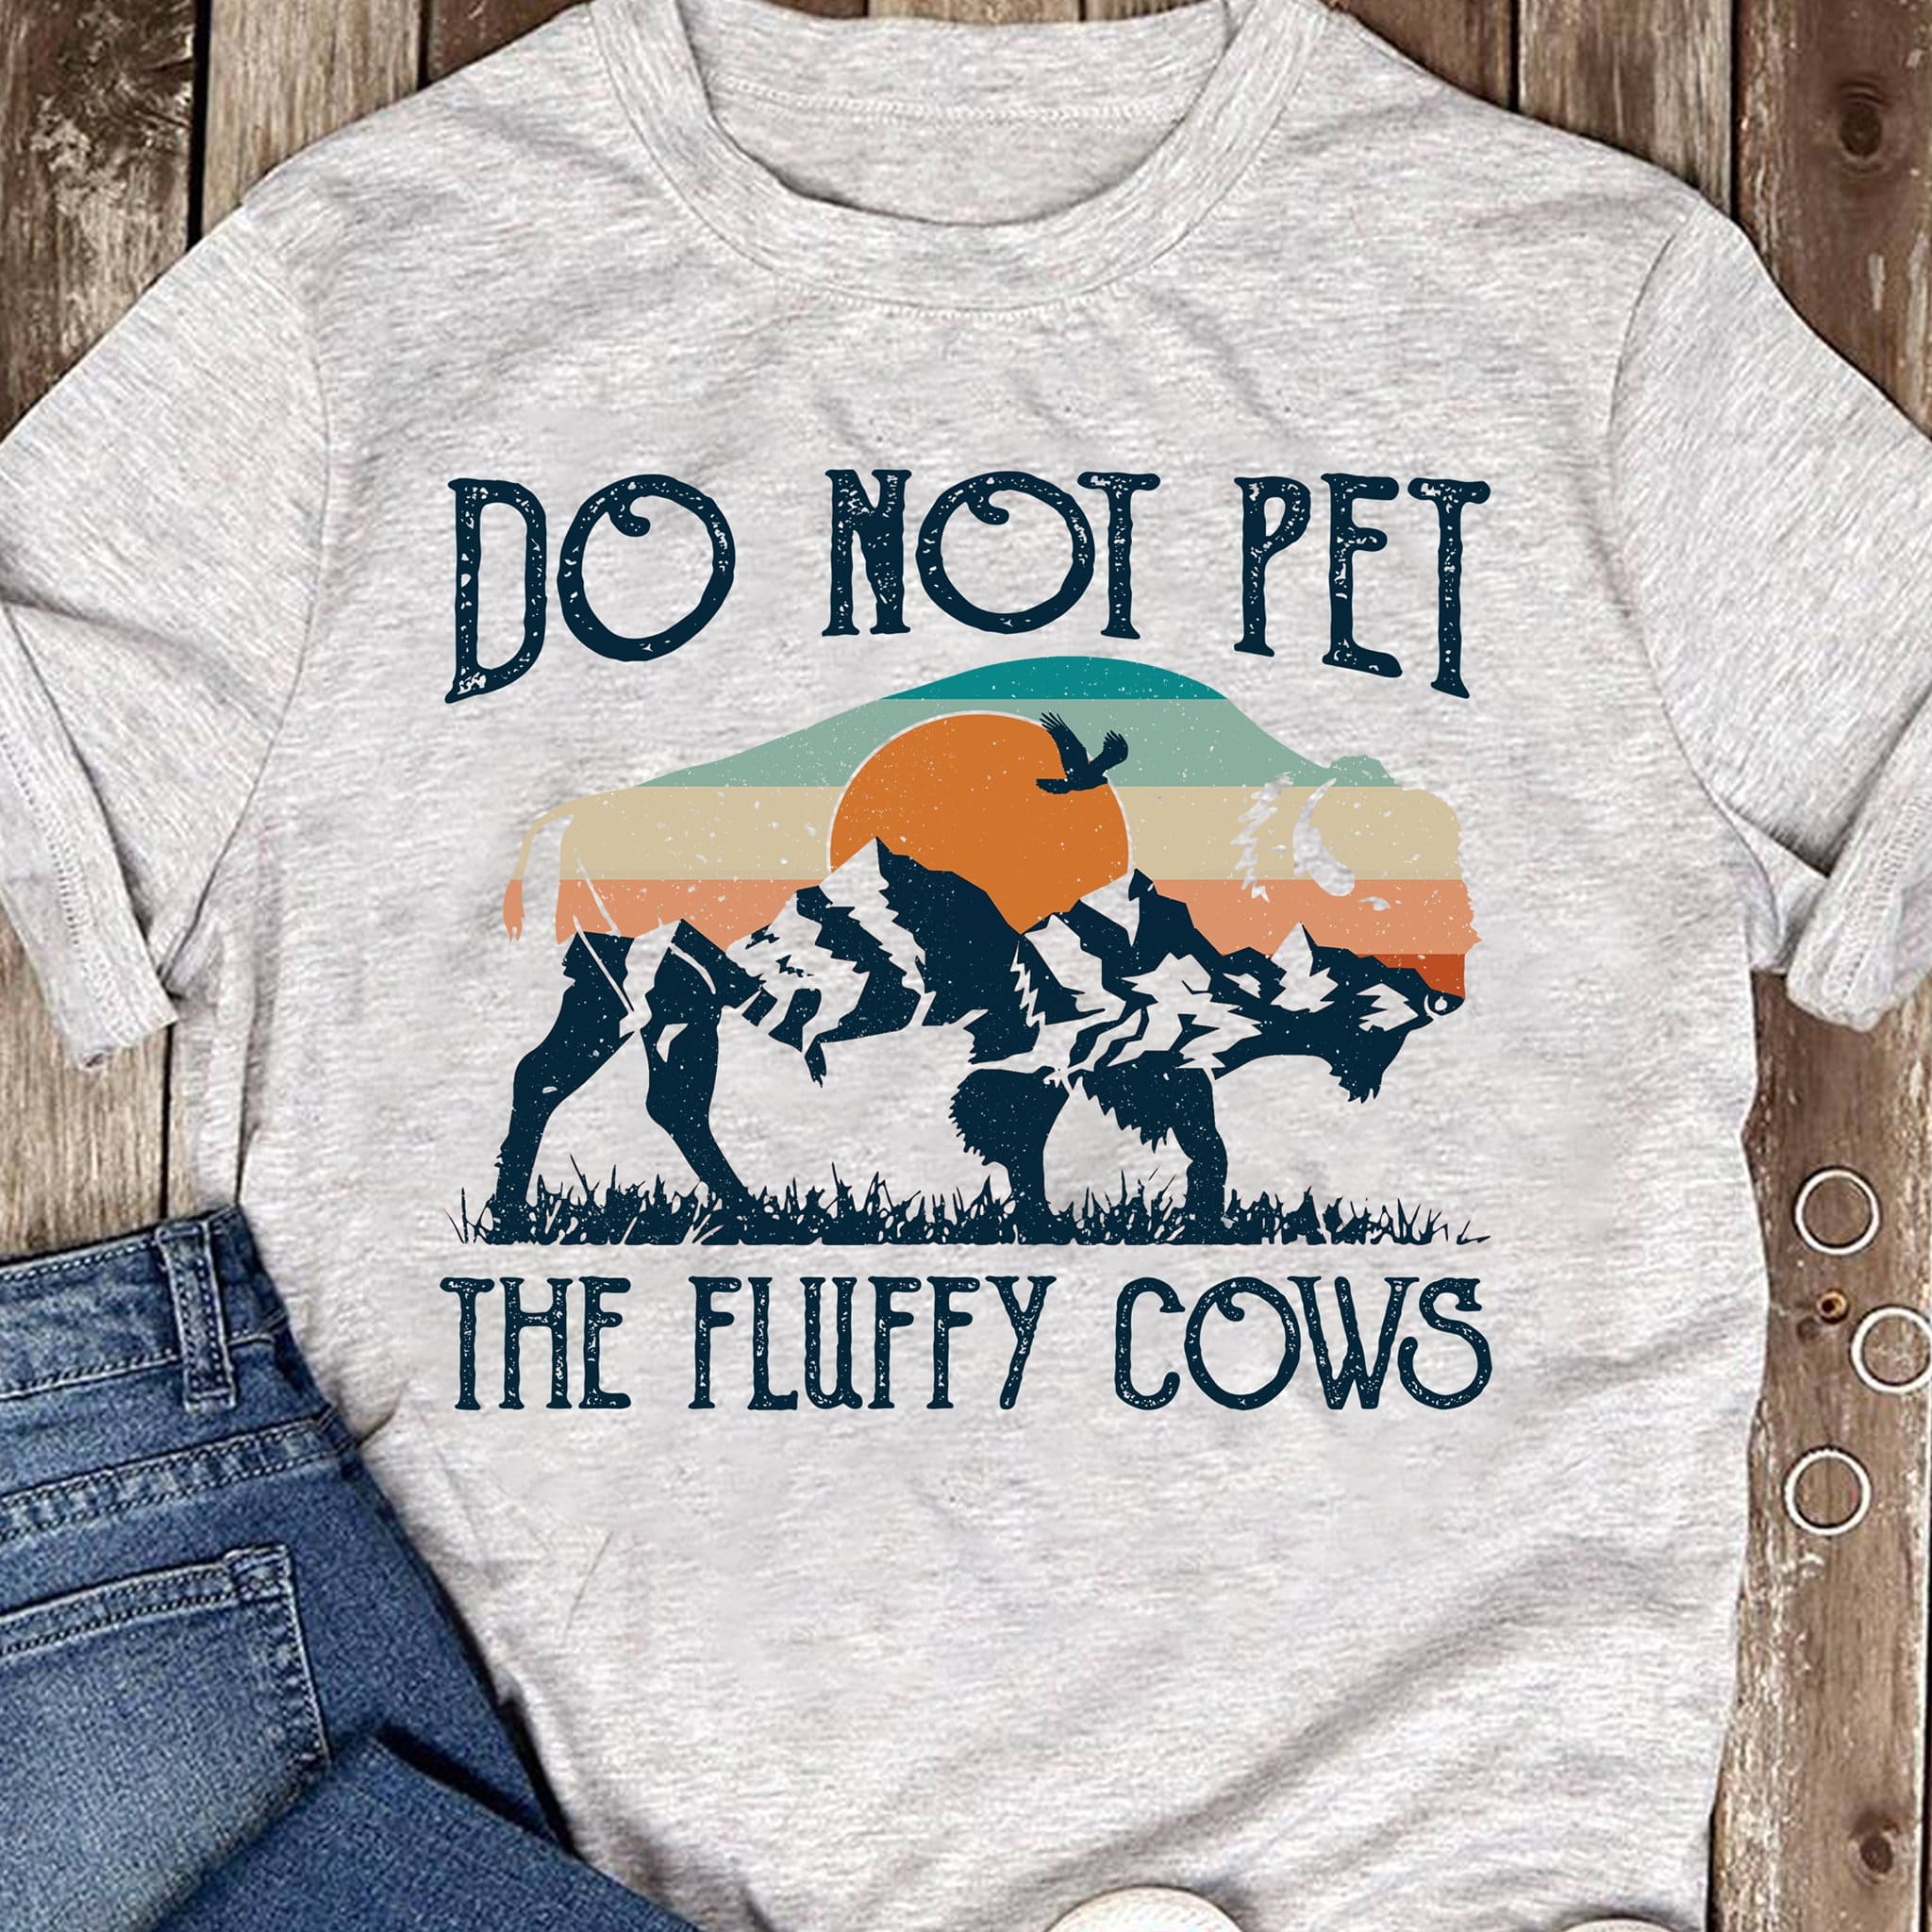 Do not pet, the fluffy cows - Mountain and cows